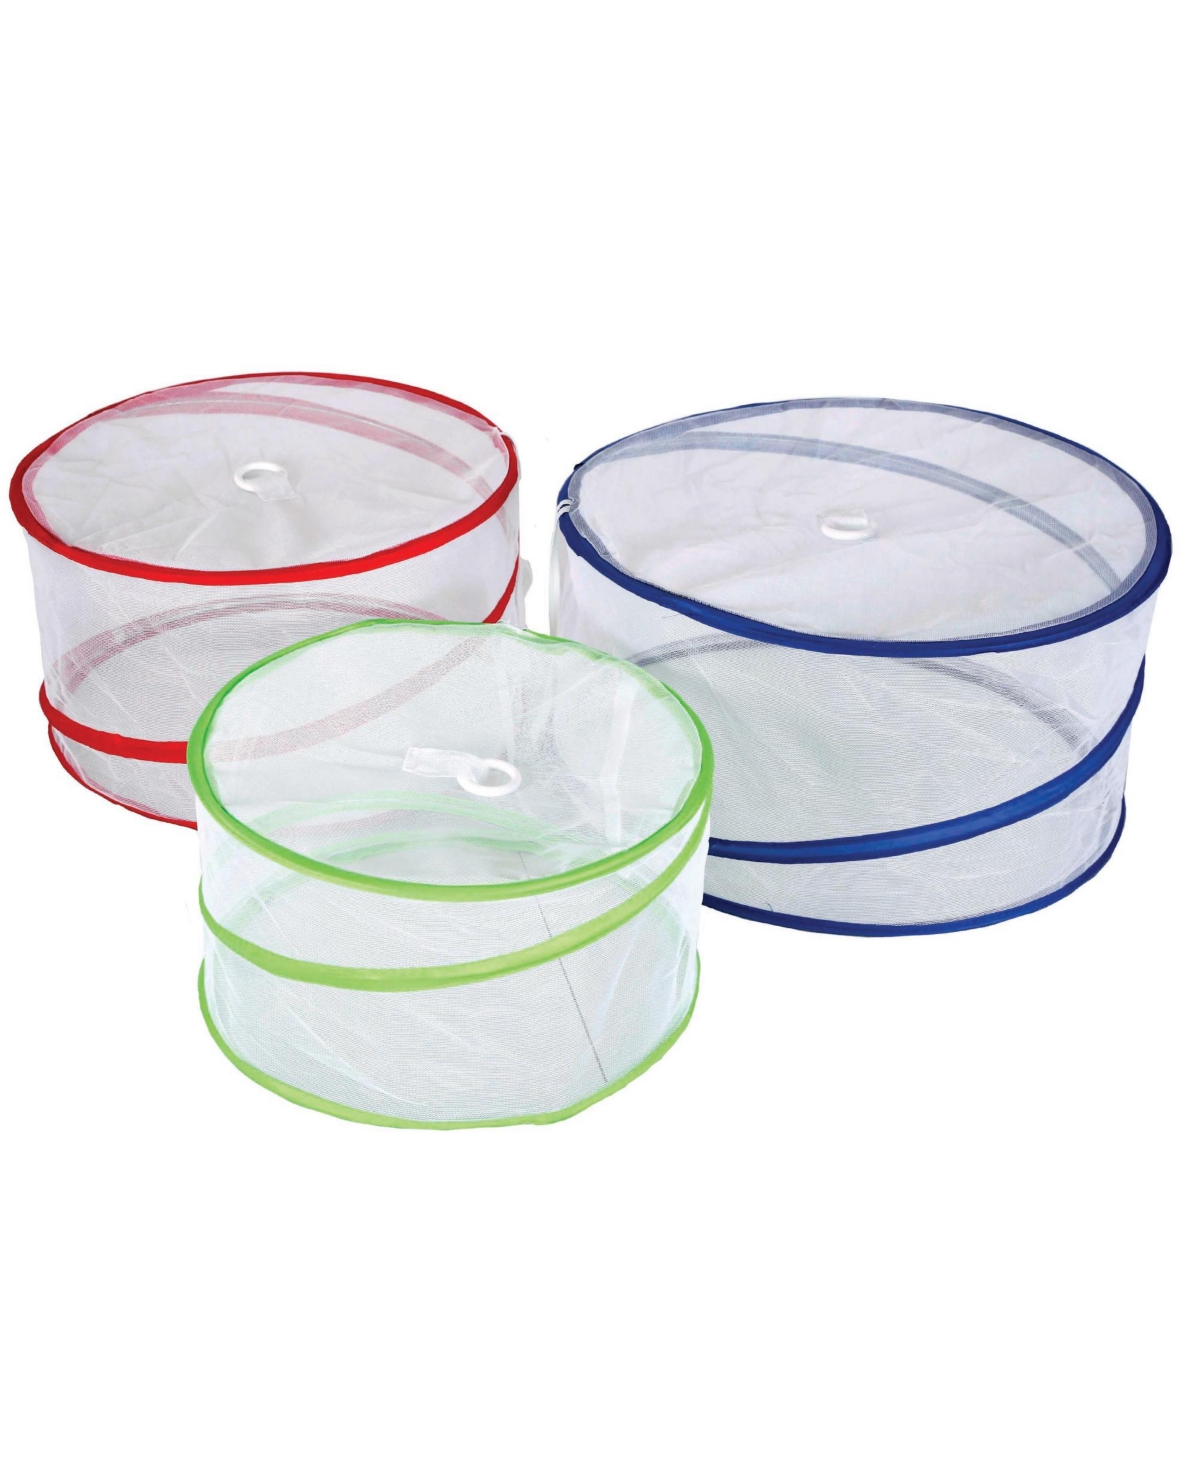 Pop-Up Mesh Food Covers - Assorted Pre-pack (See Table